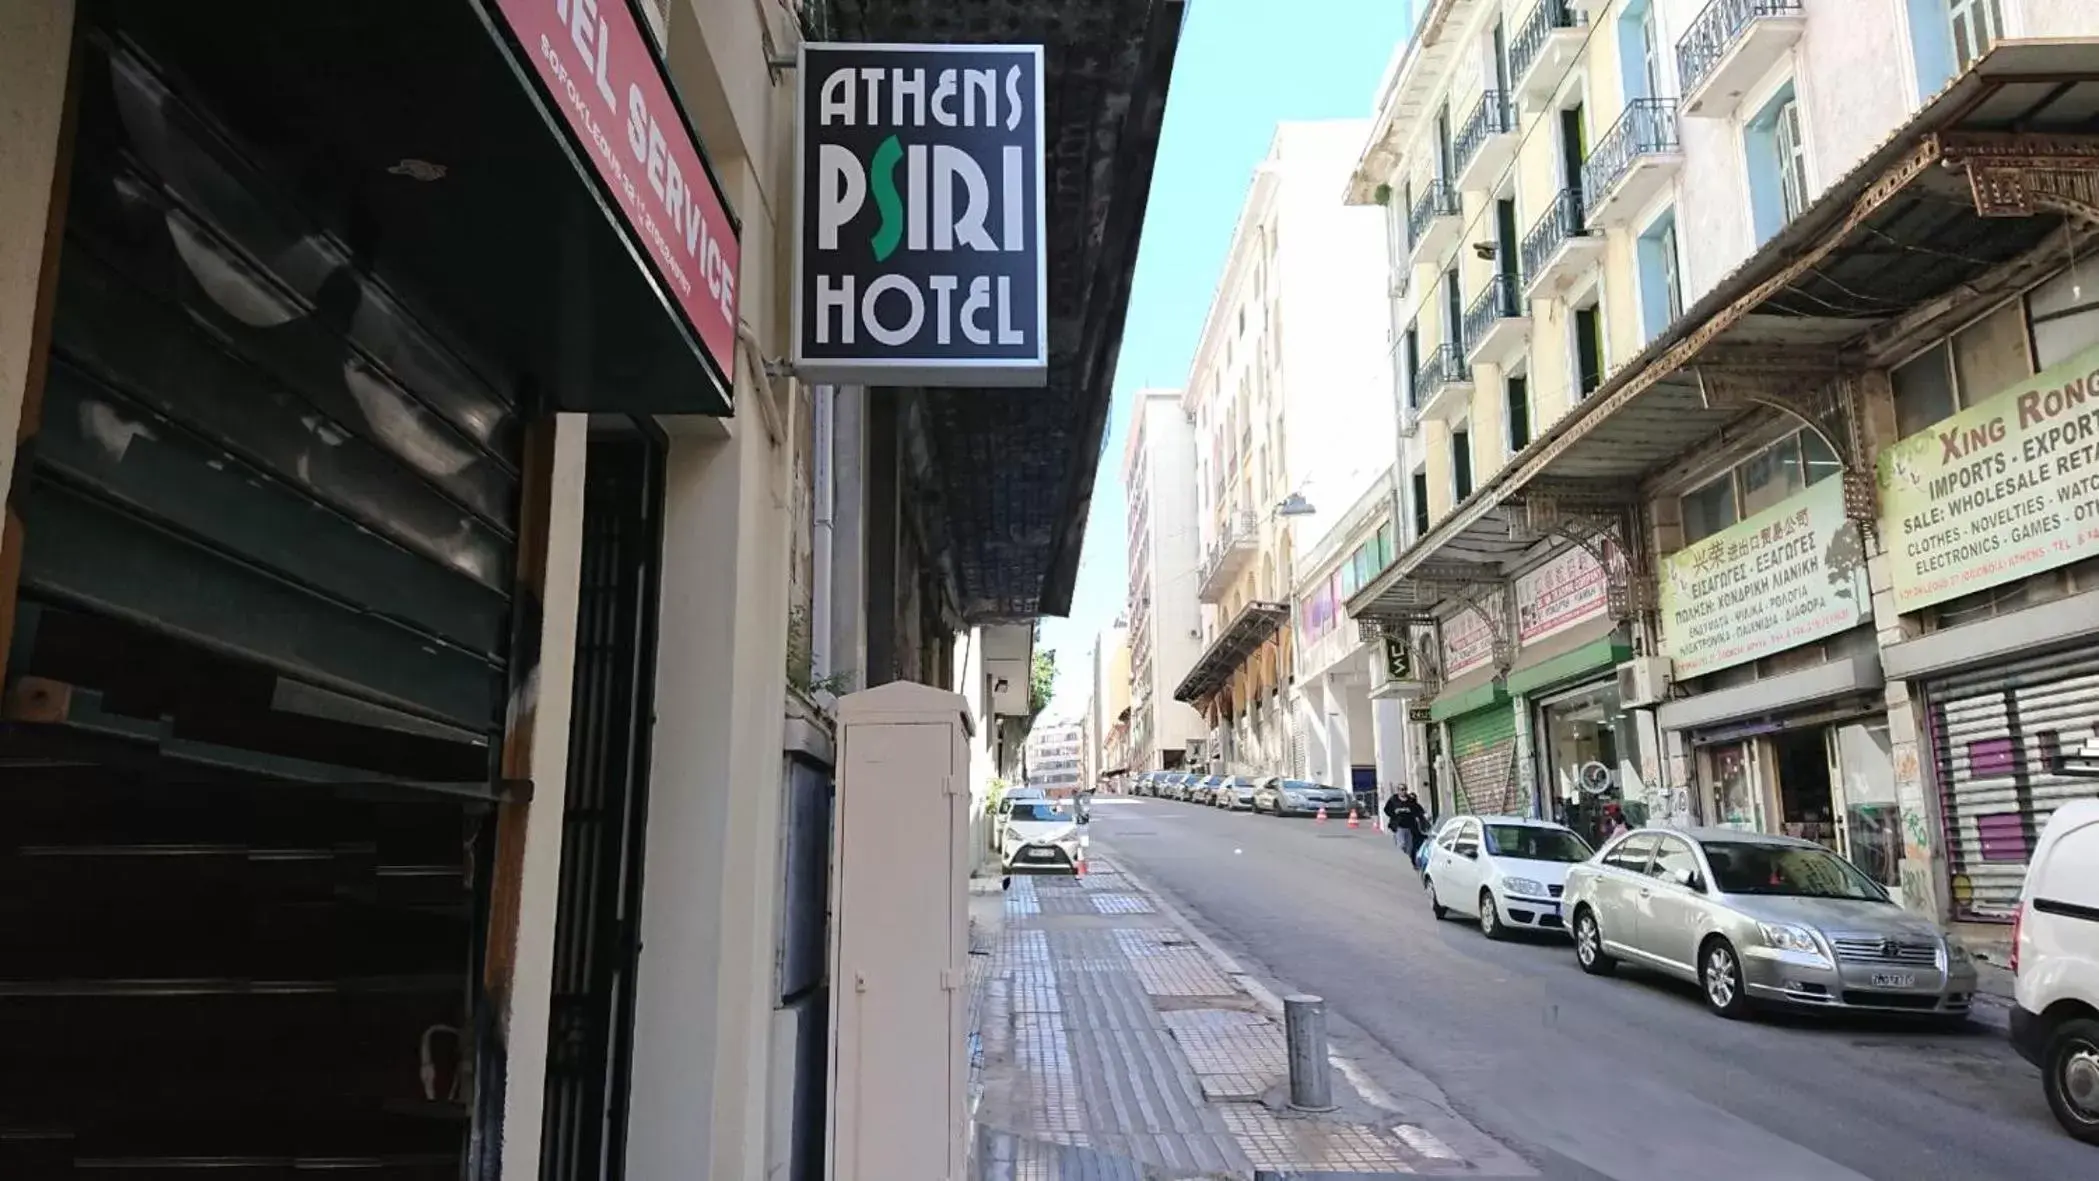 Street view in Athens Psiri Hotel